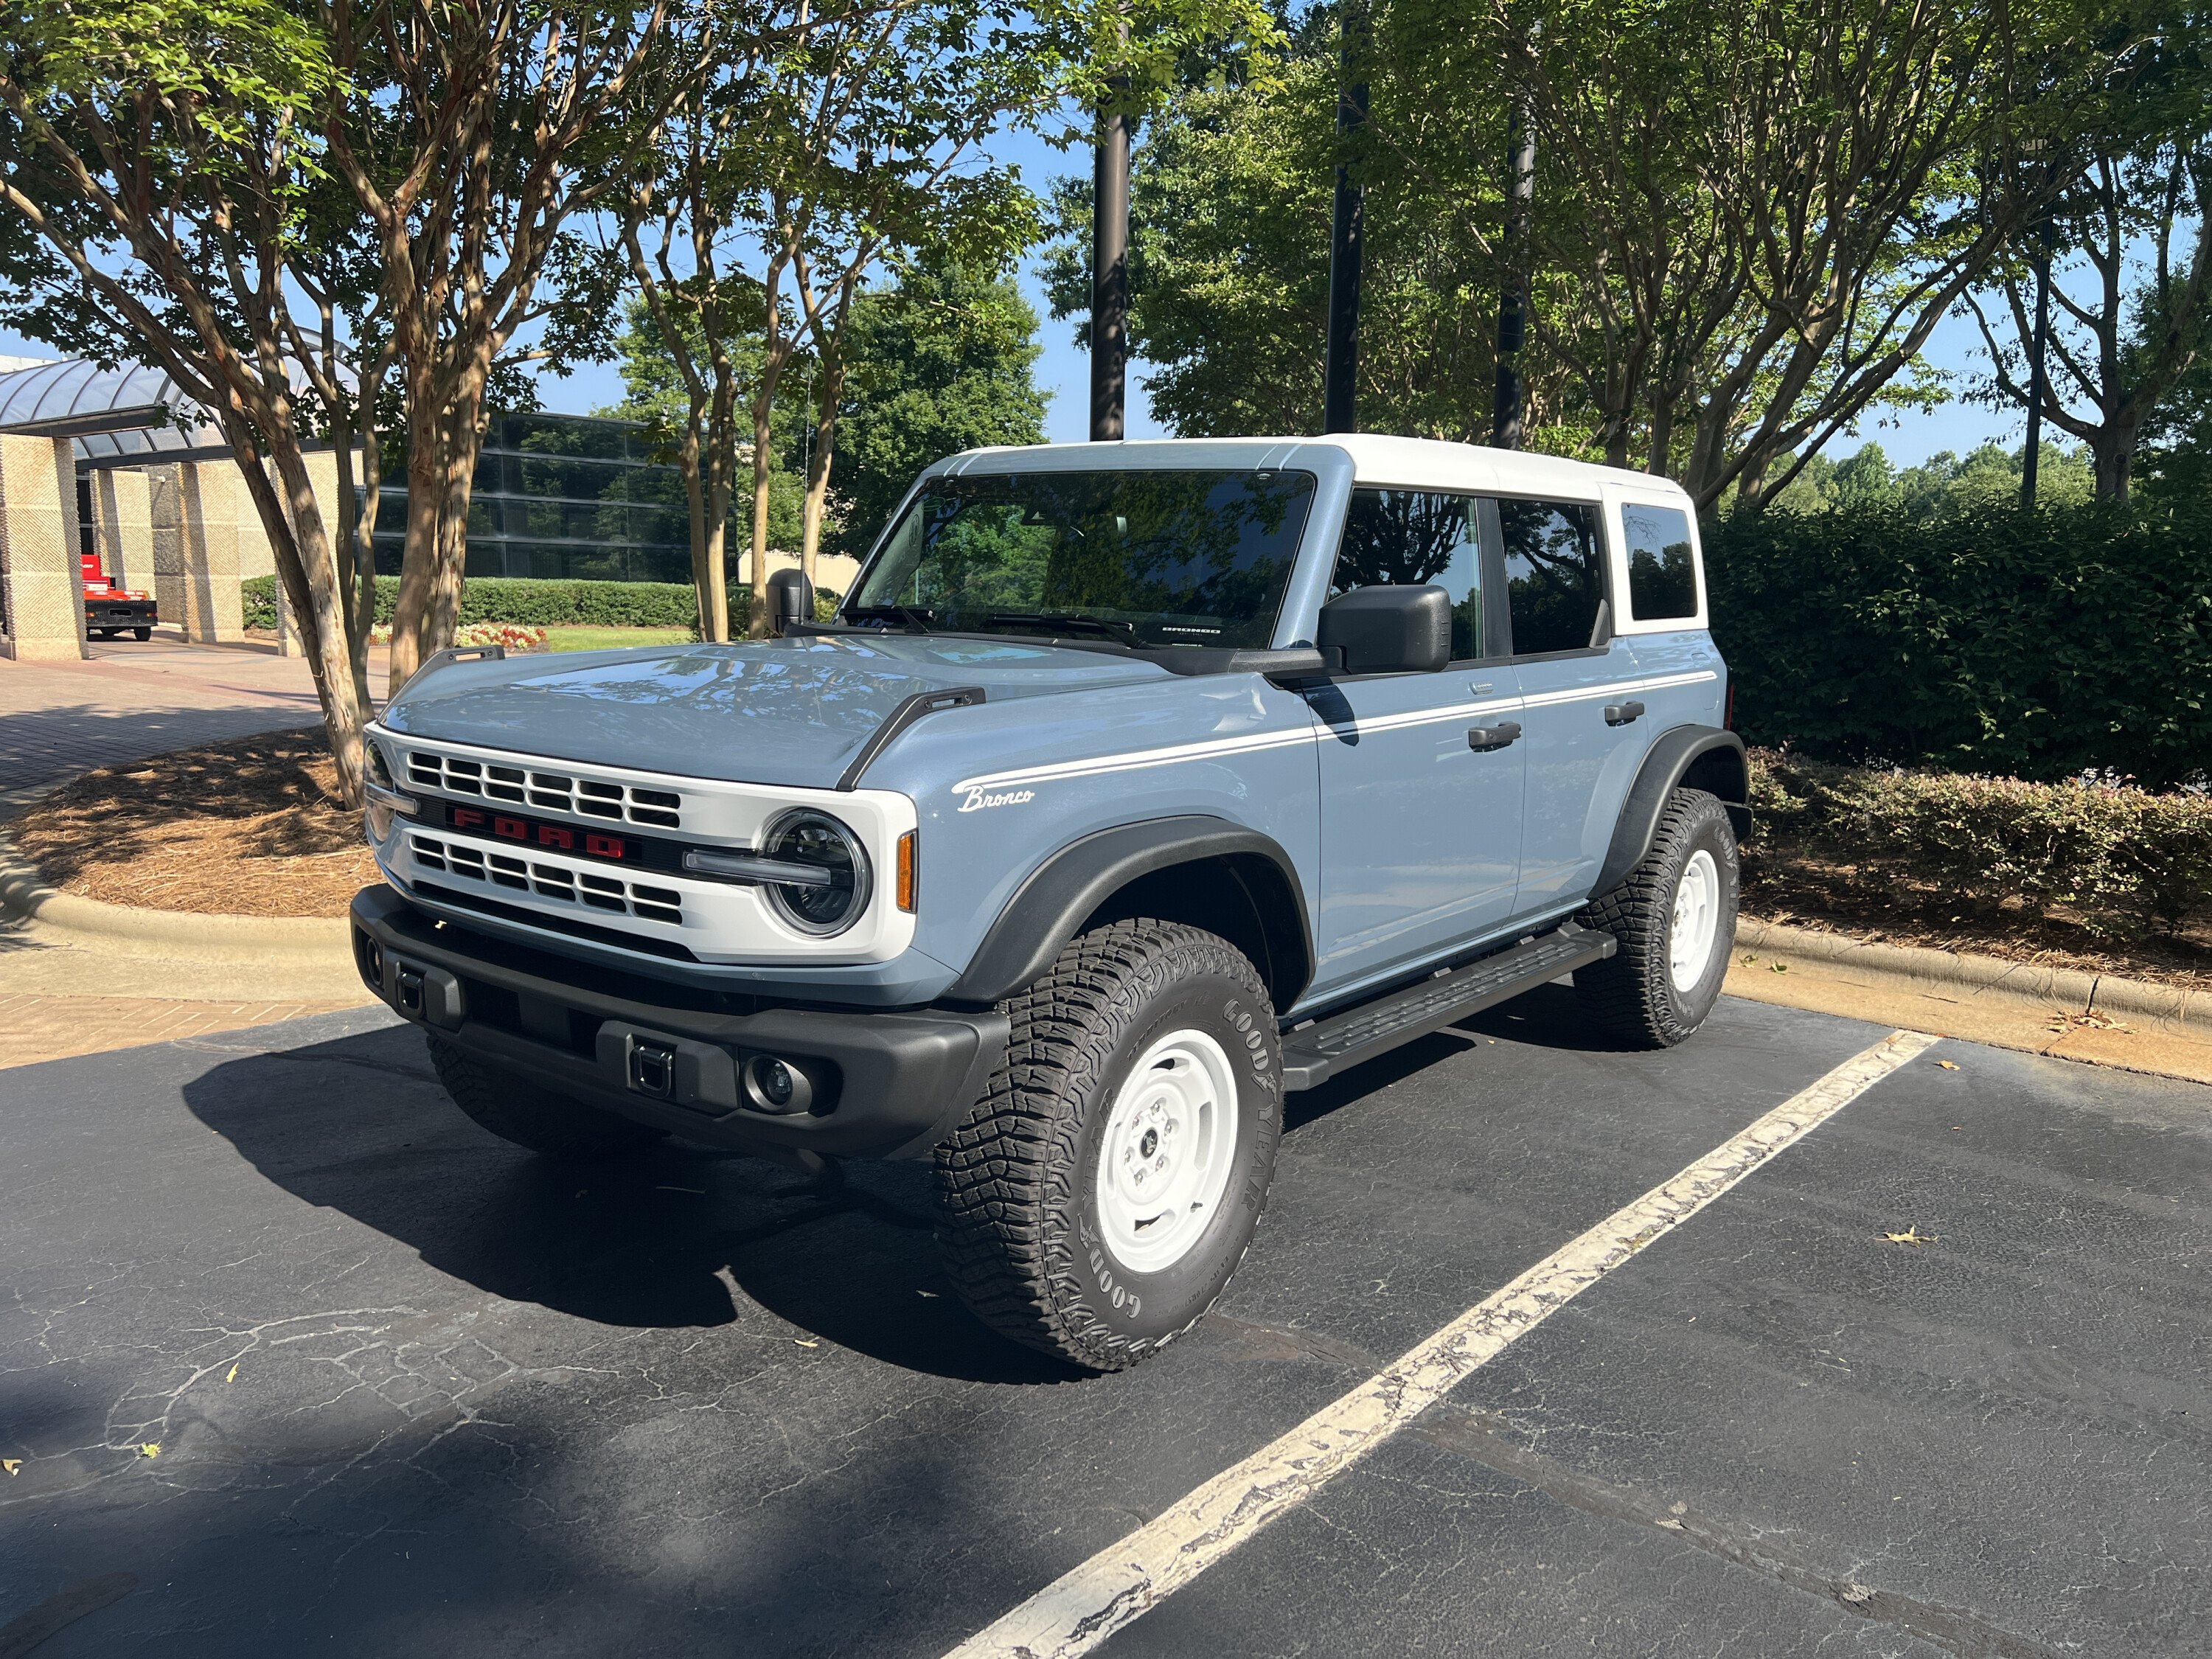 97a31b52/2023 ford bronco heritage limited edition suv img 3750 JPG